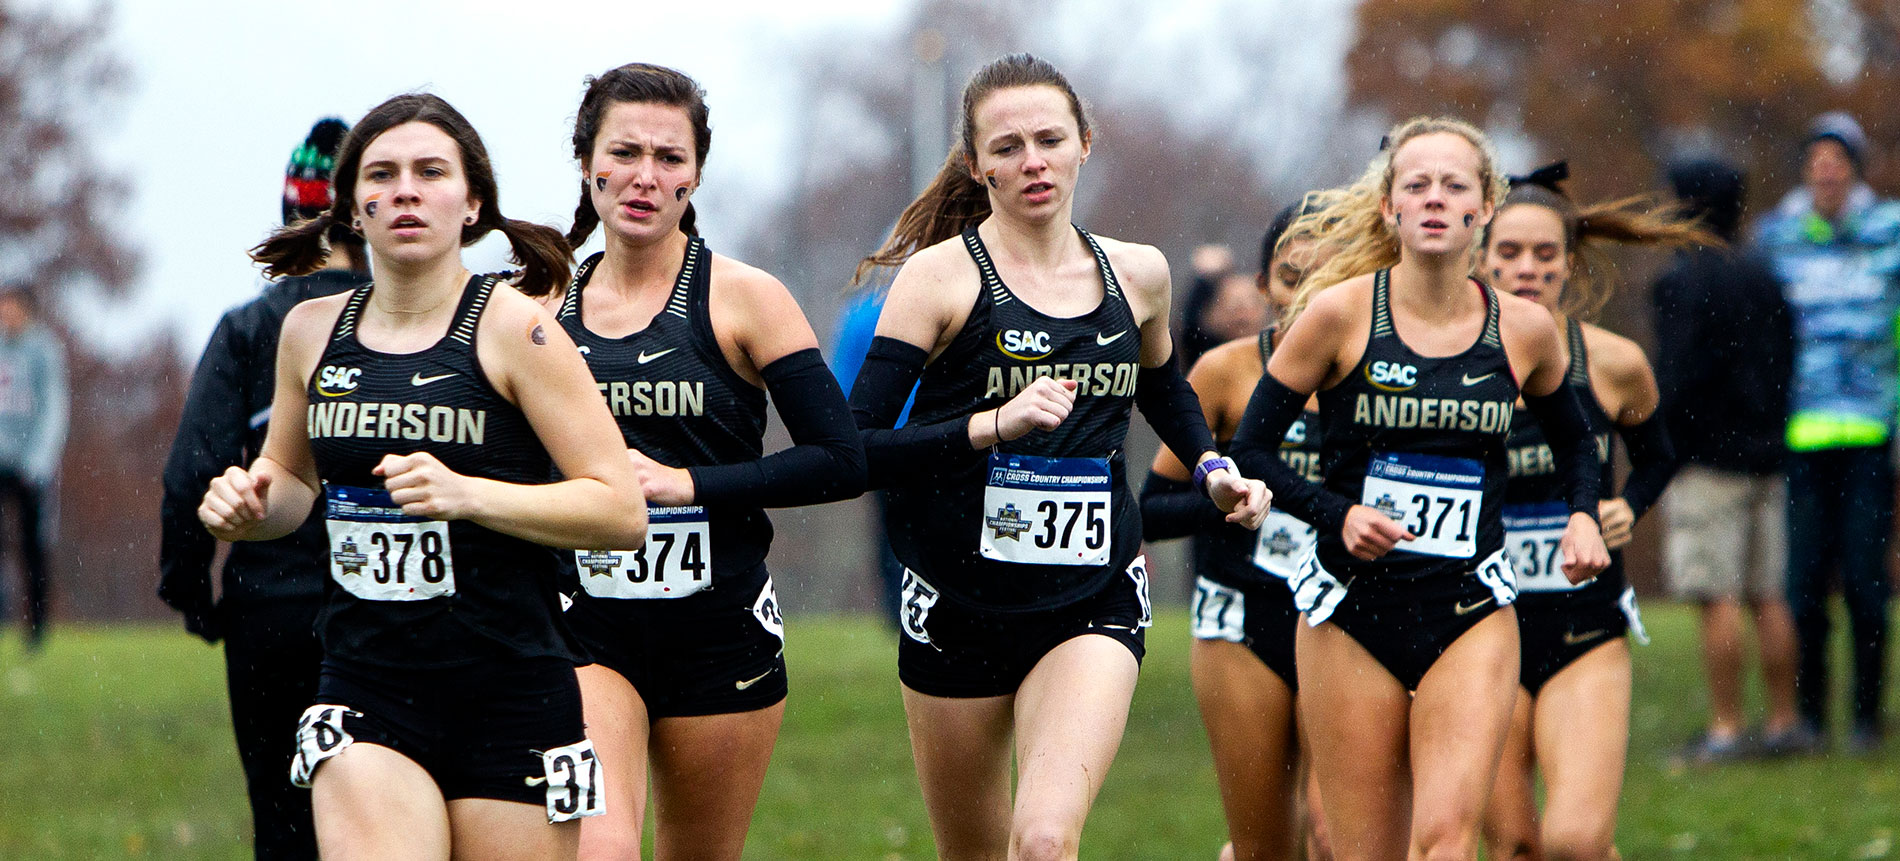 Women’s Cross Country Team Continues to Build Legacy by Earning Athletic Department’s Highest Academic Honor